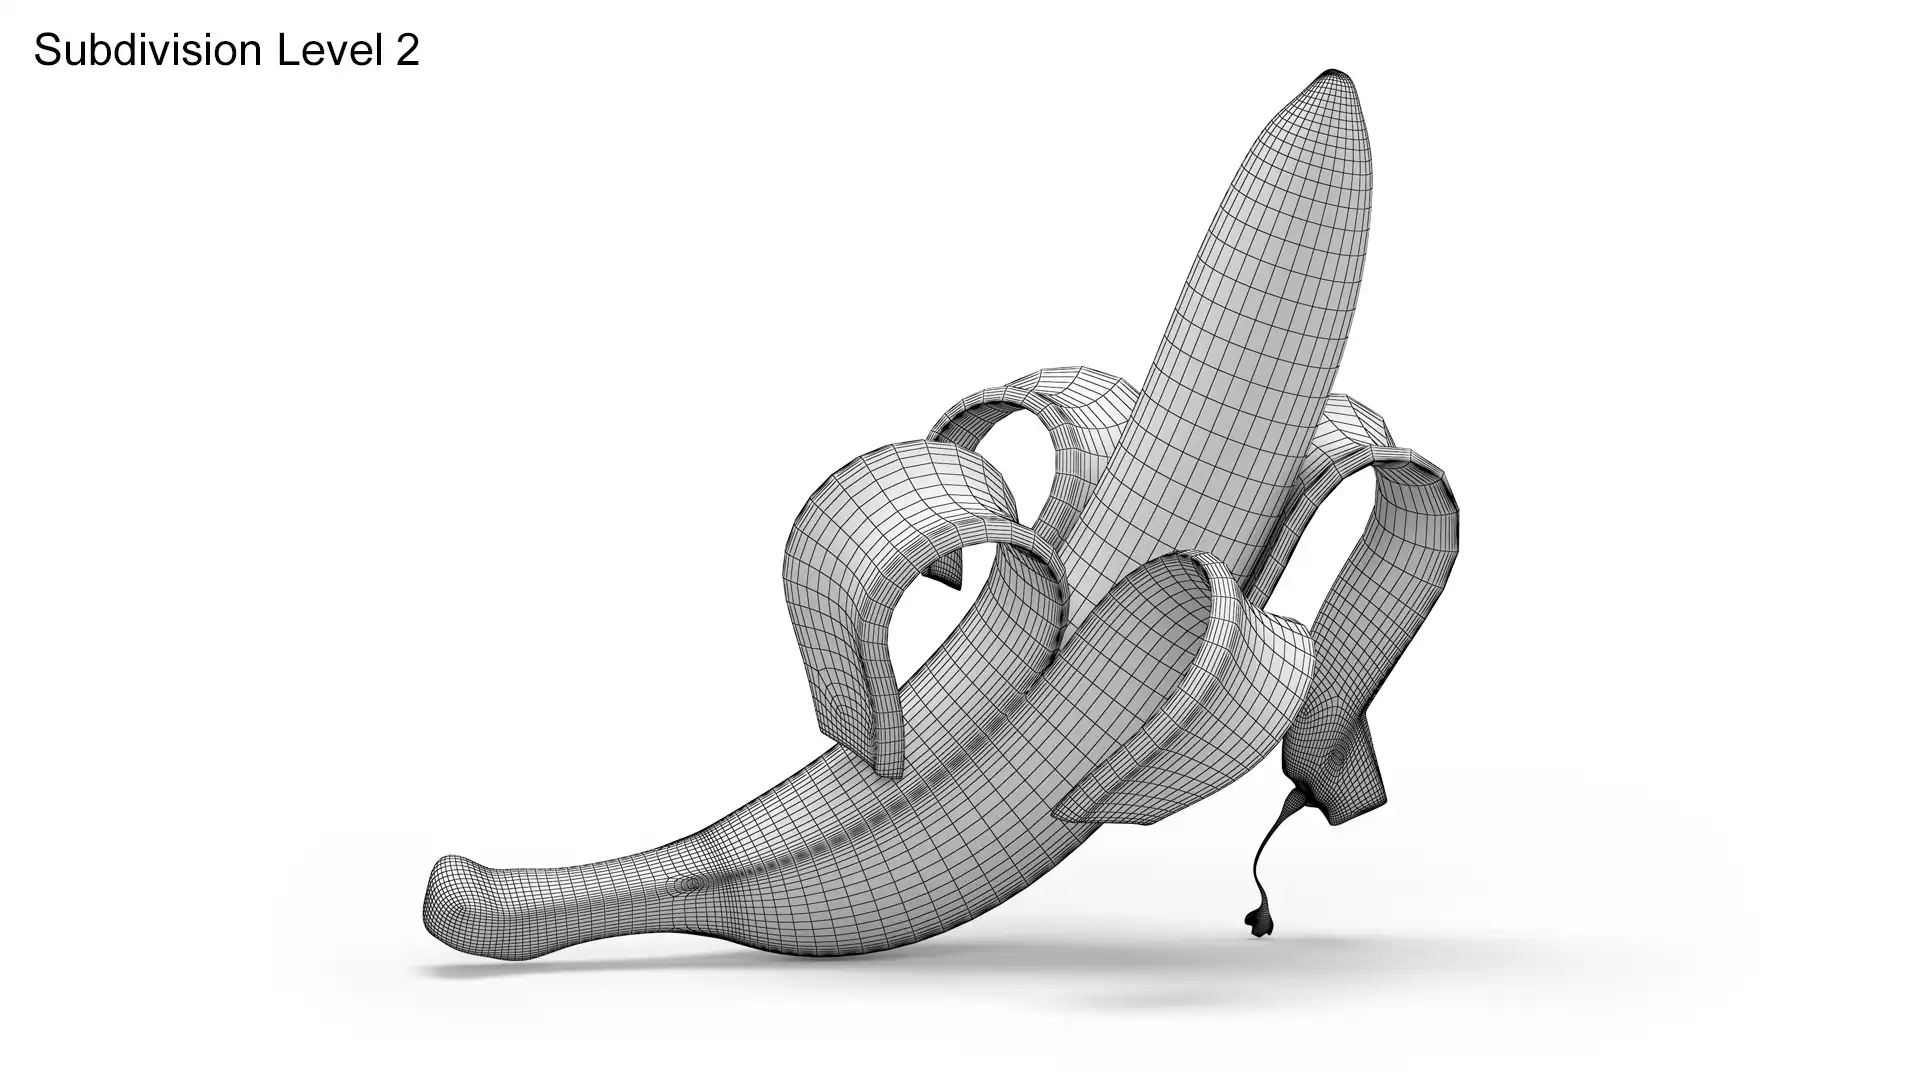 banana 3d model wireframe render with mesh subdivision level 2